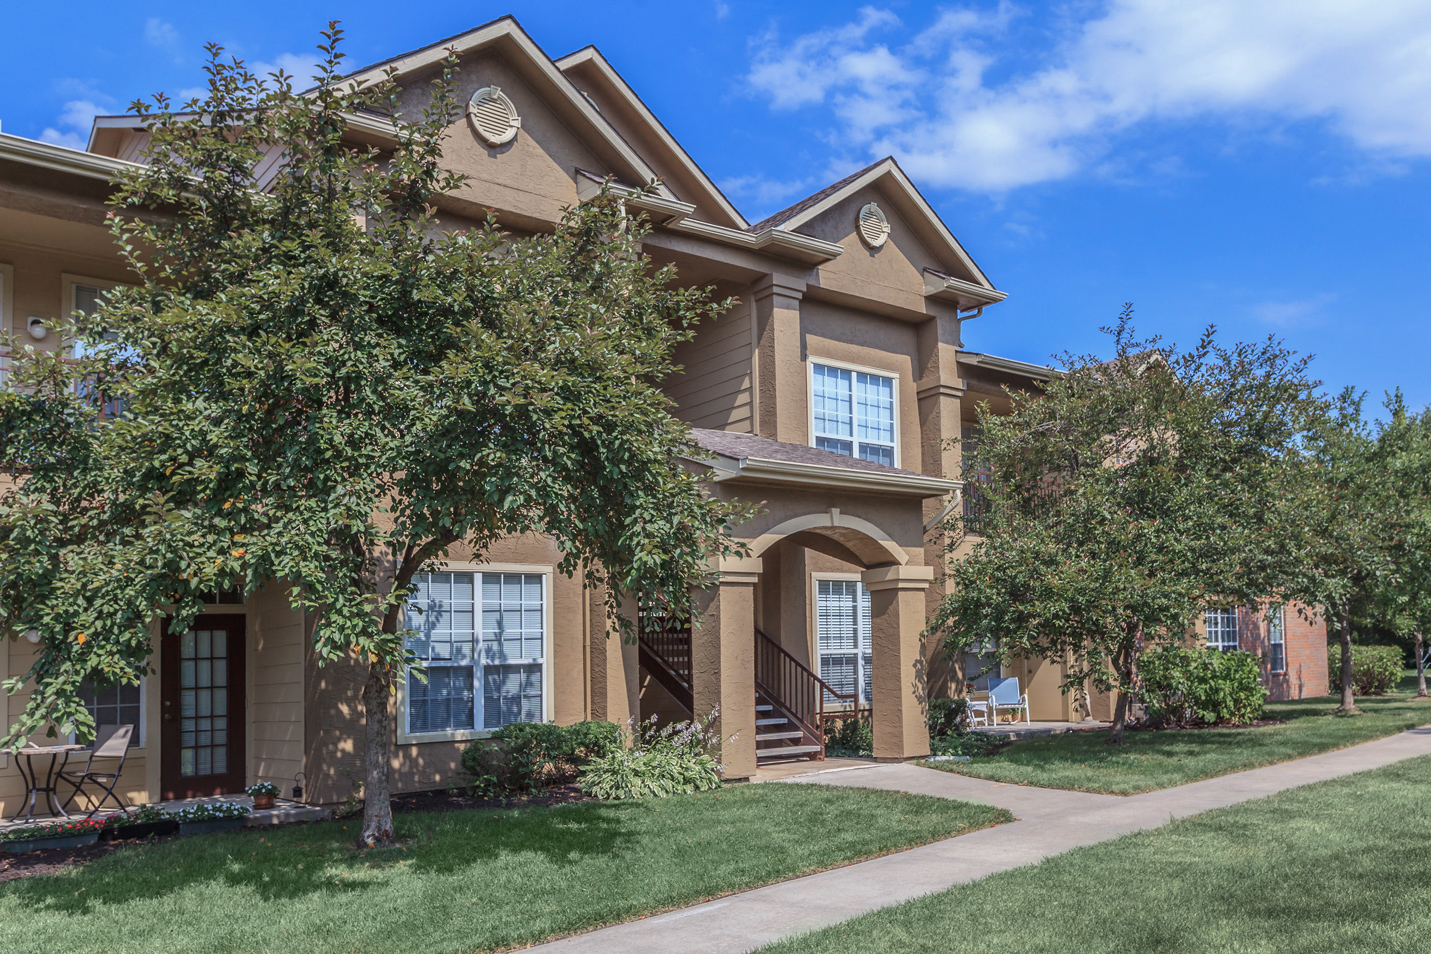 Exquisite Exterior Designs at Crowne Chase Apartment Homes, Overland Park, Kansas